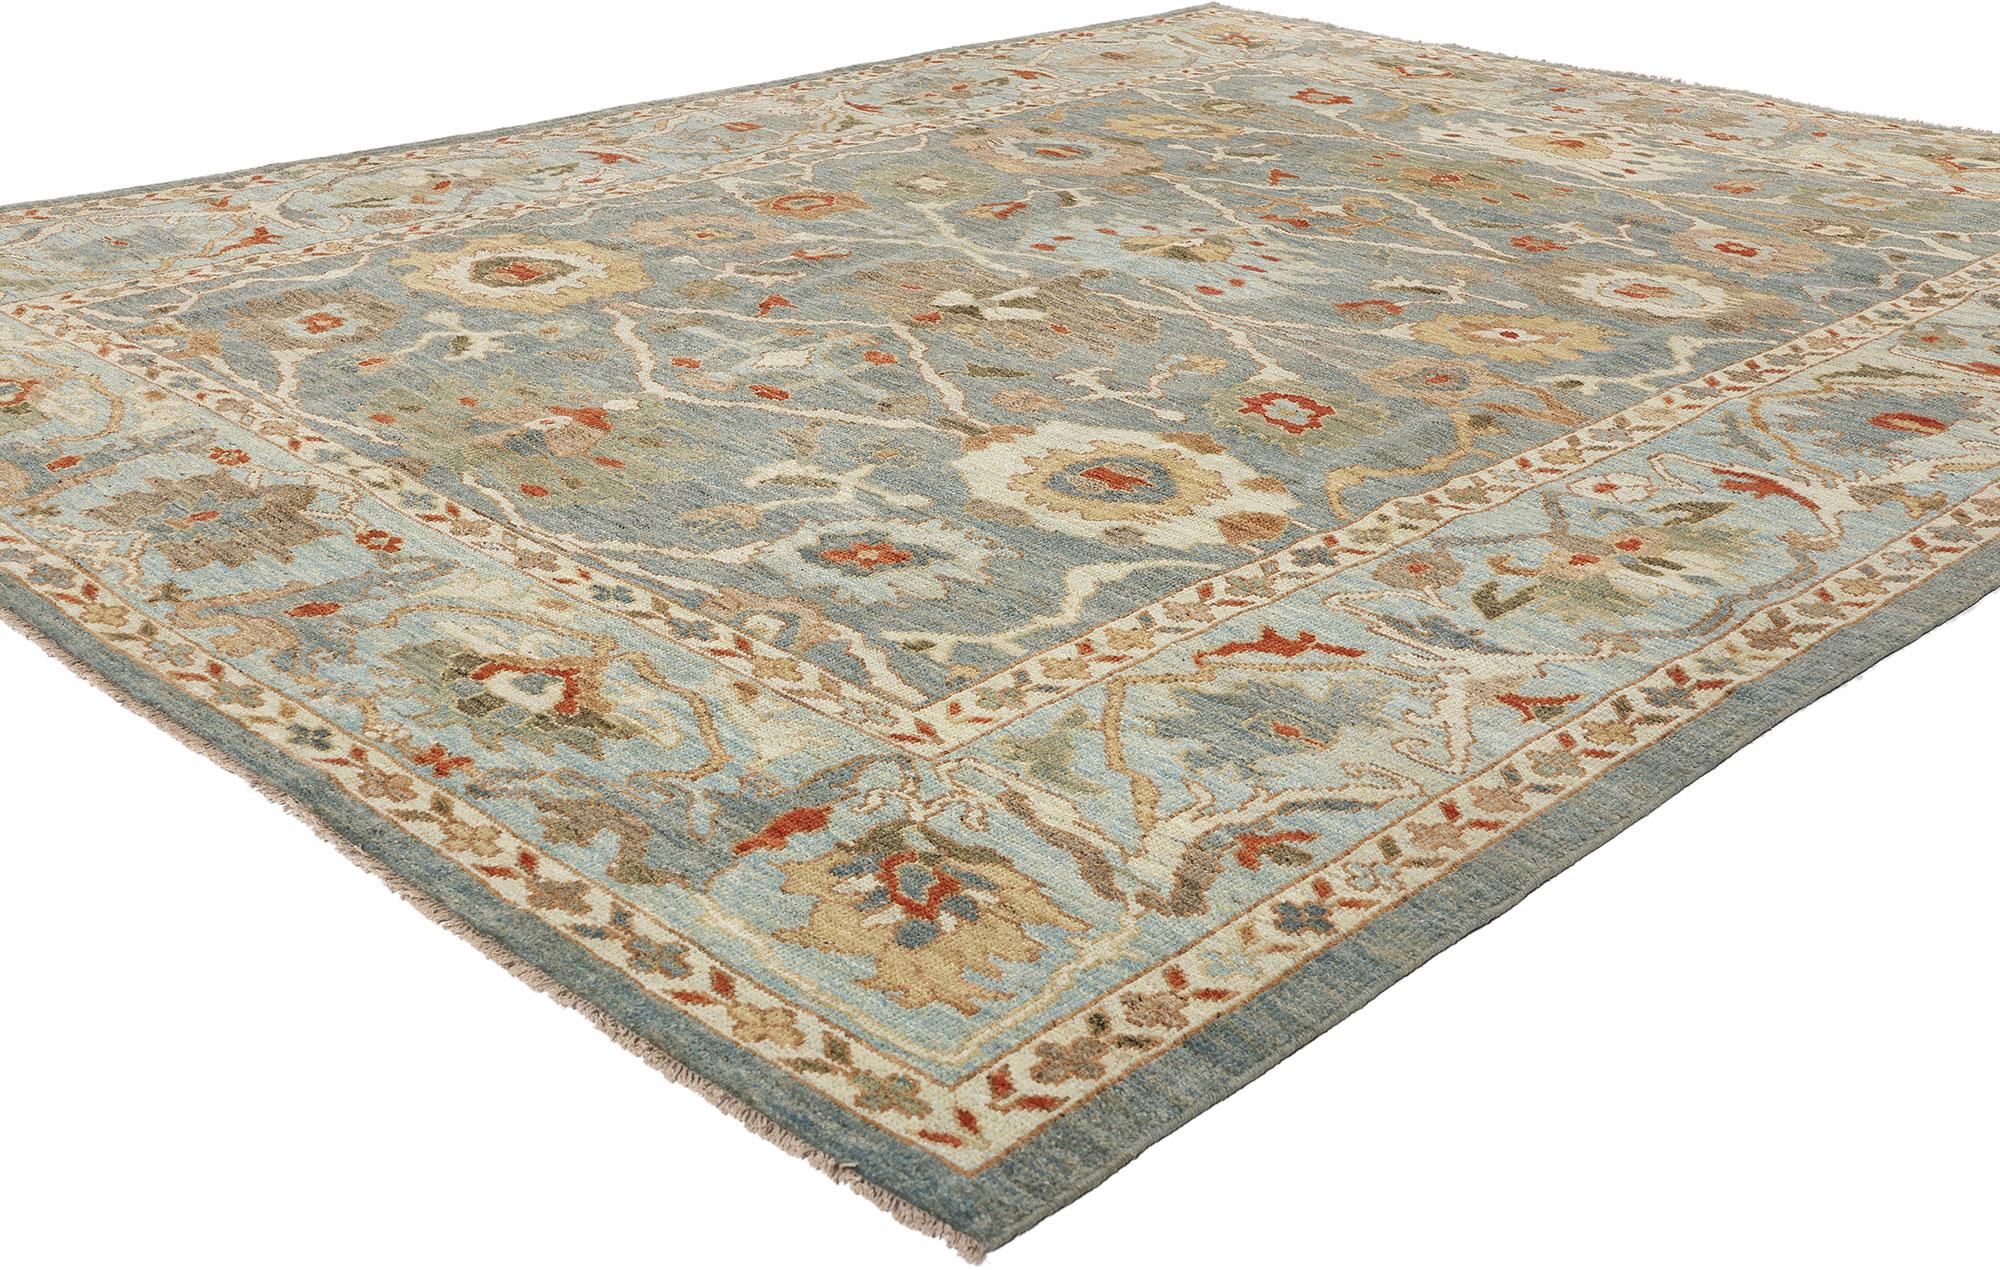 61287 Modern Blue Persian Sultanabad Rug, 08'02 x 10'07. Originating in Iran's Sultanabad region, Persian Sultanabad rugs are esteemed for their outstanding craftsmanship, enduring materials, and intricate detailing. Handwoven with meticulous